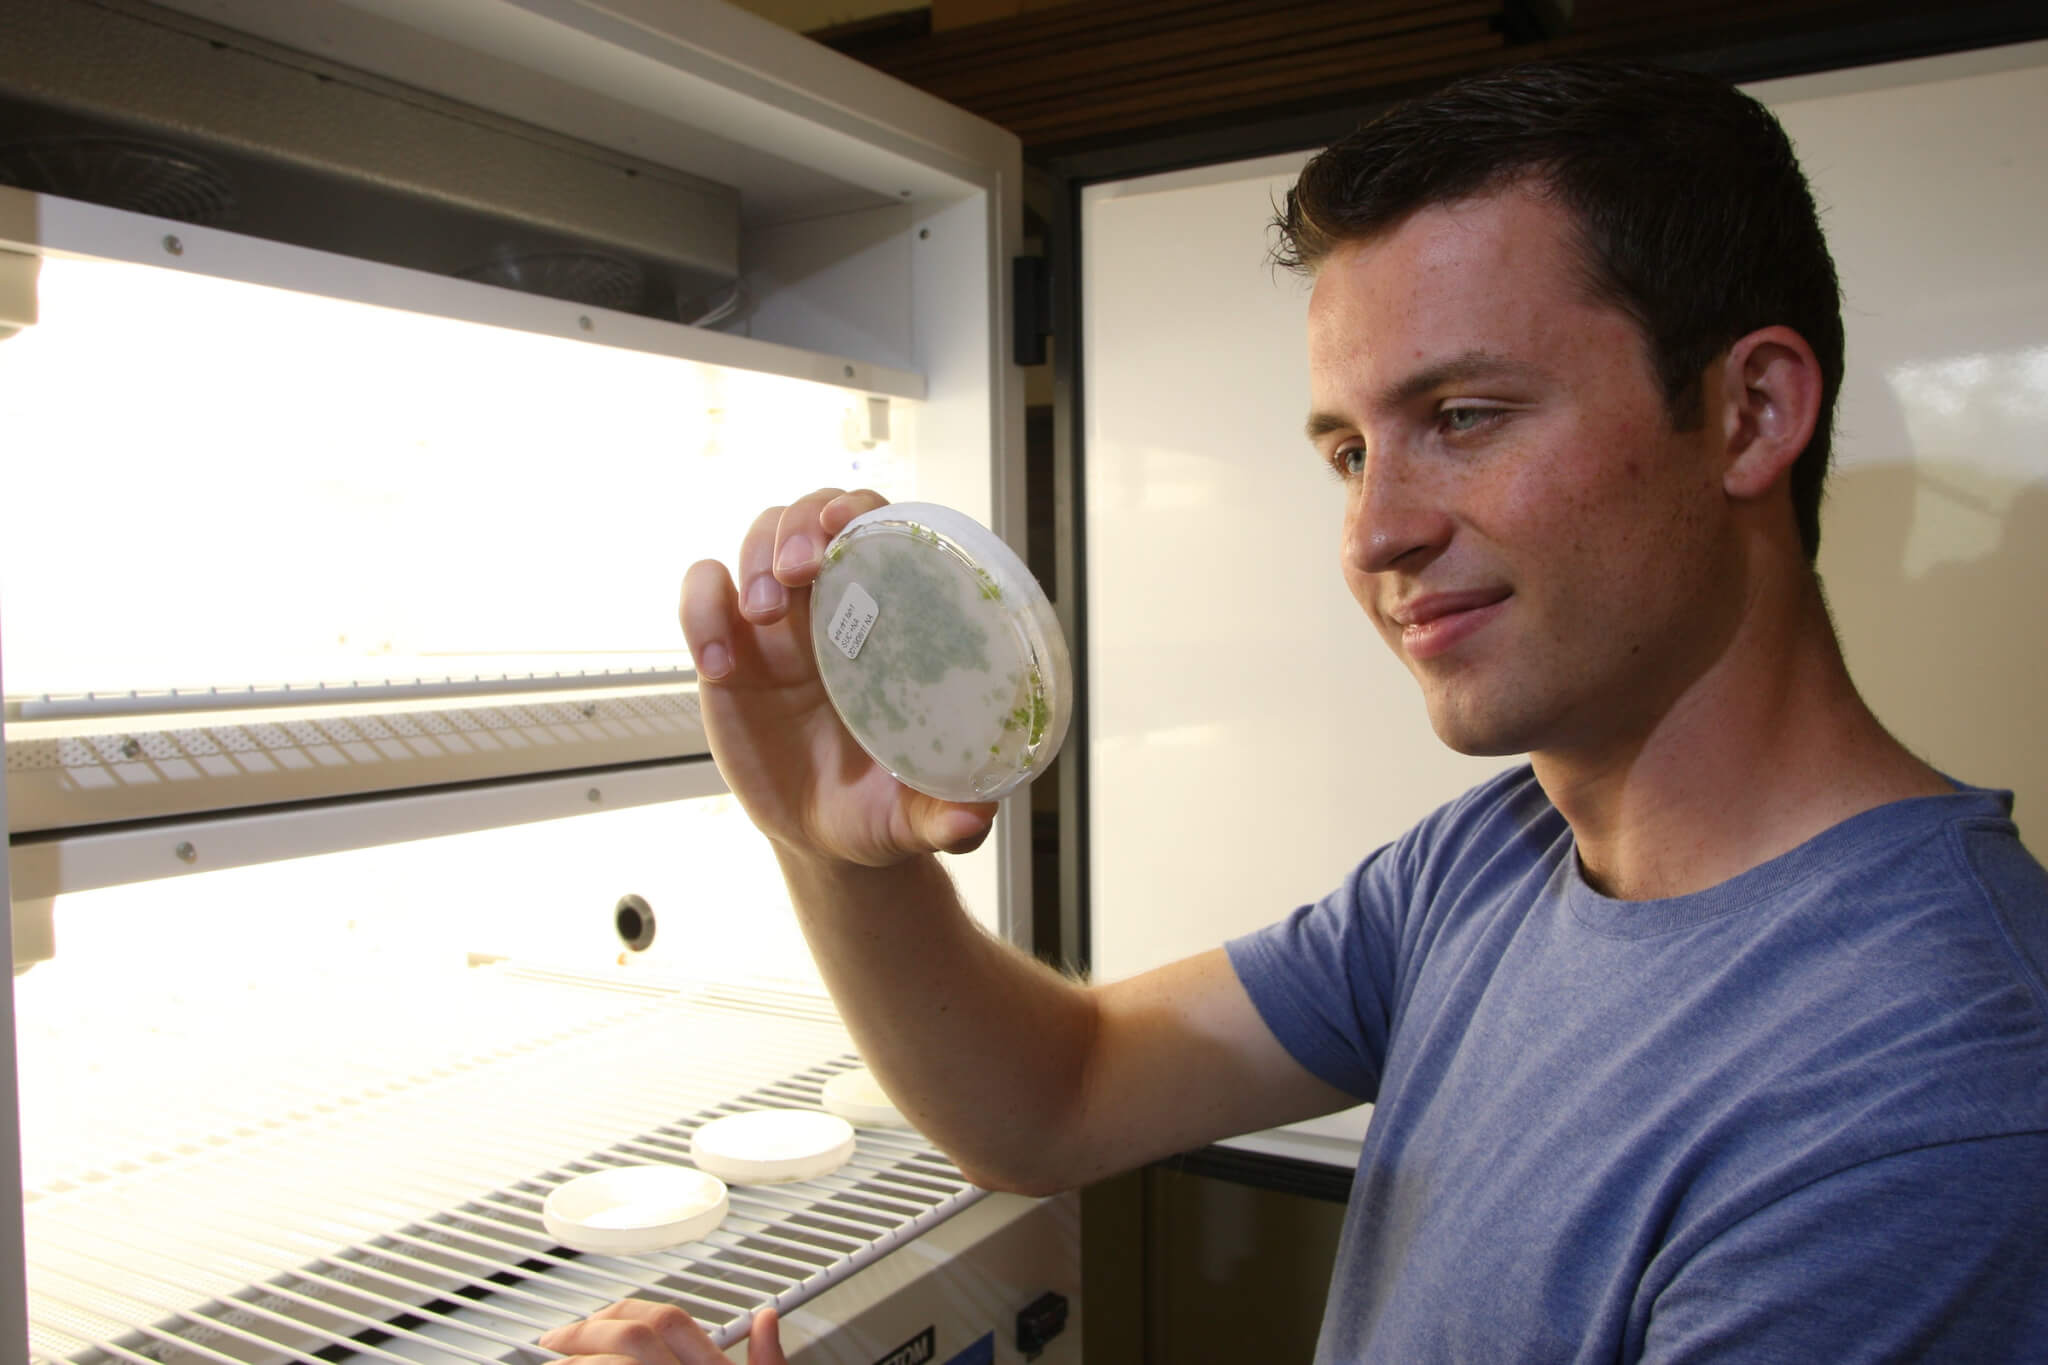 Cole Wunderlich (seen here in 2013) joined Clint Chapple's lab as an undergraduate student in 2012. His programming work helped develop a method for identifying matebolites in plants. (Purdue College of Agriculture photo)